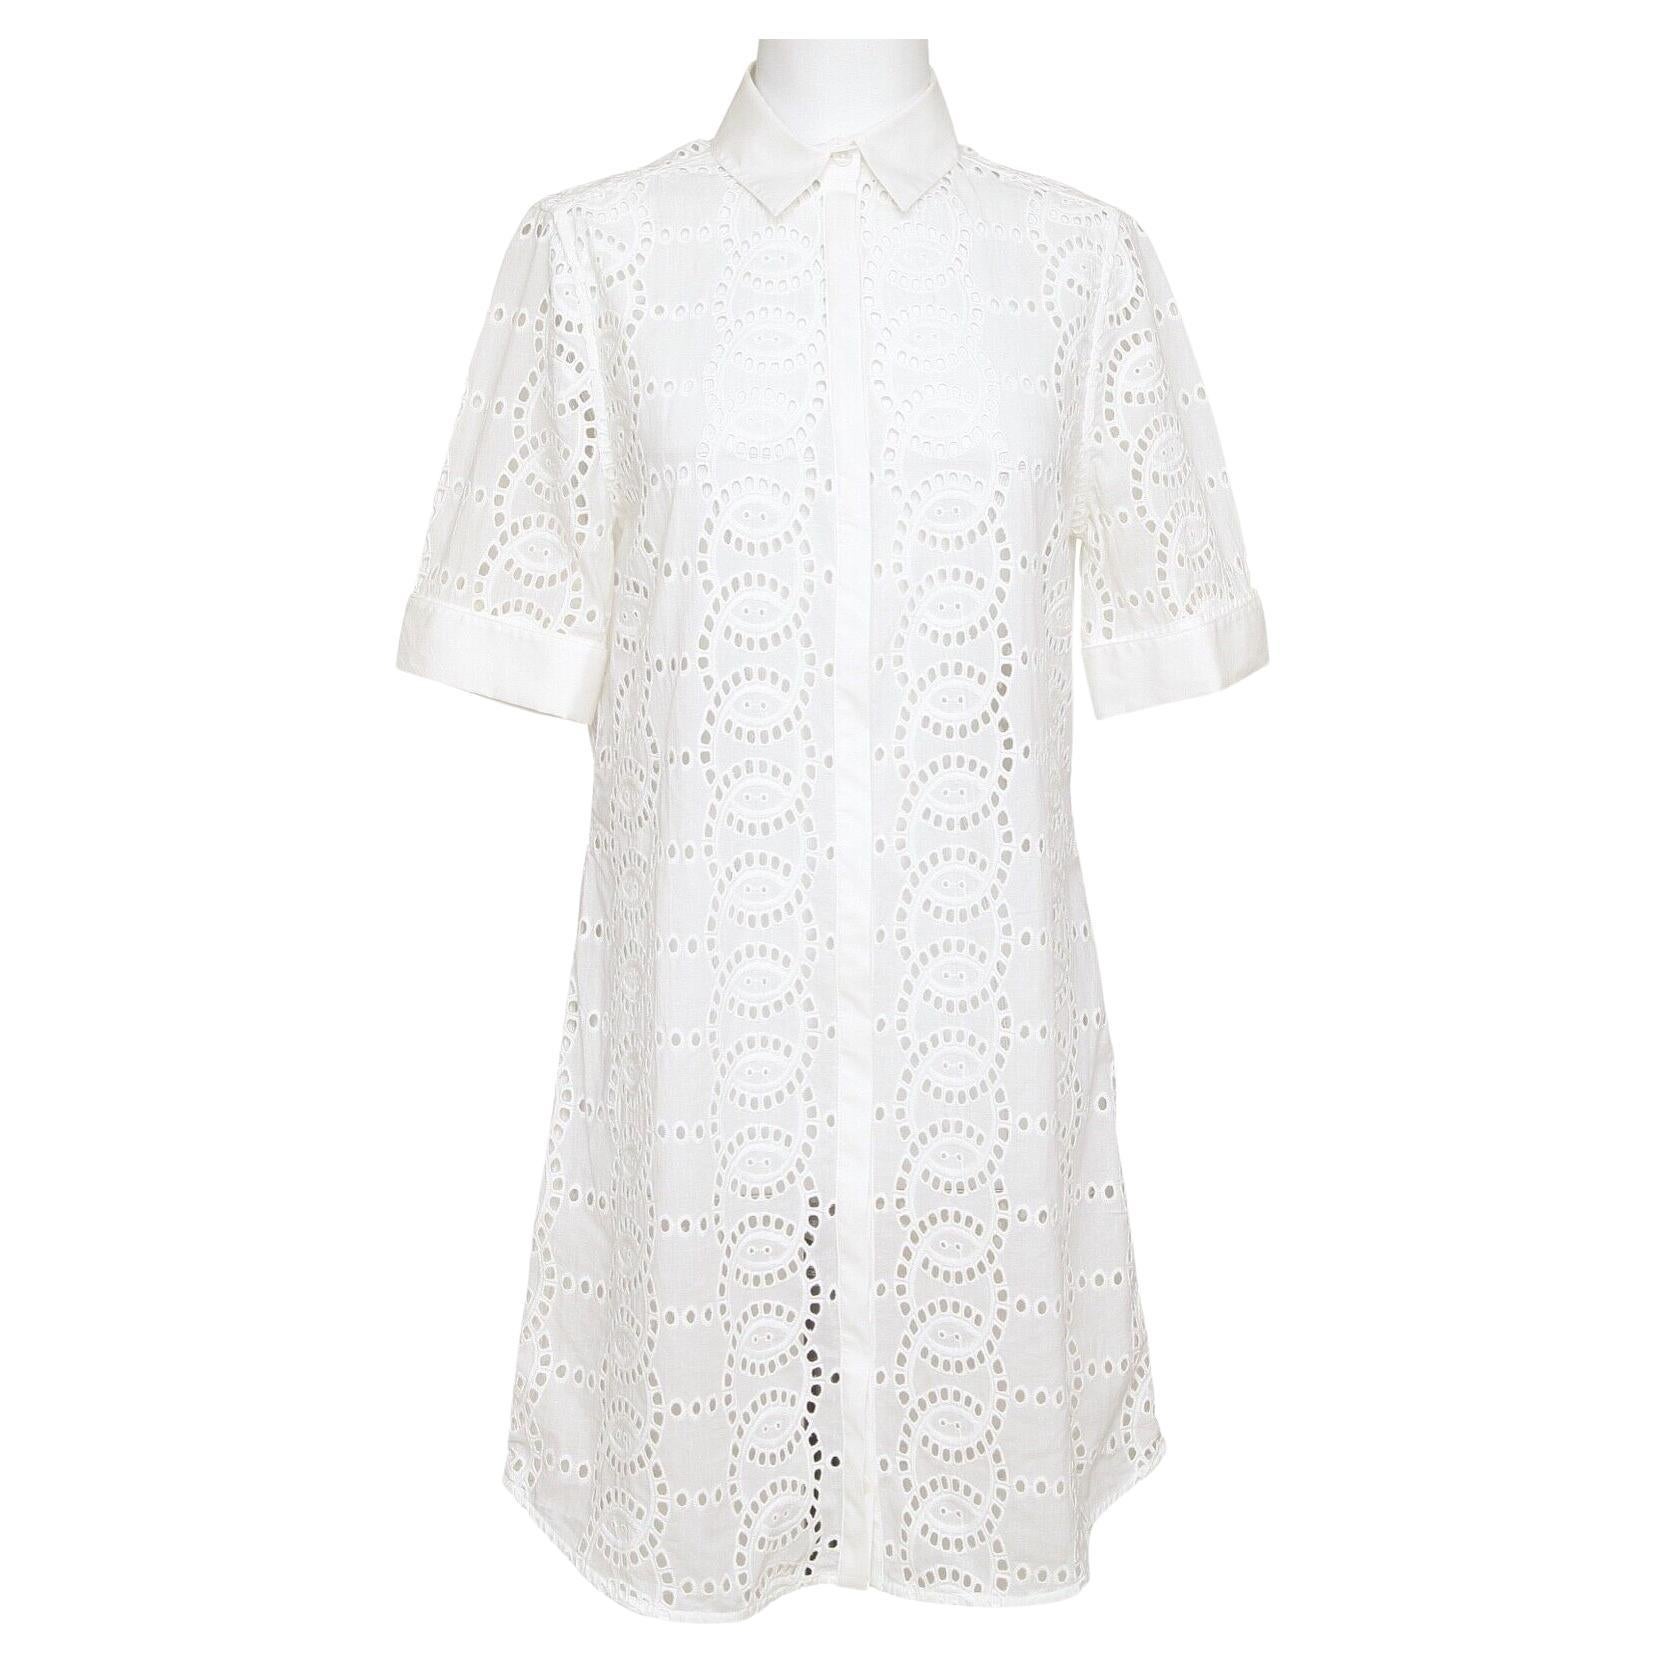 ANNE FONTAINE Shirt Dress White Short Sleeve Button Down Eyelet Collar Cotton 40 For Sale